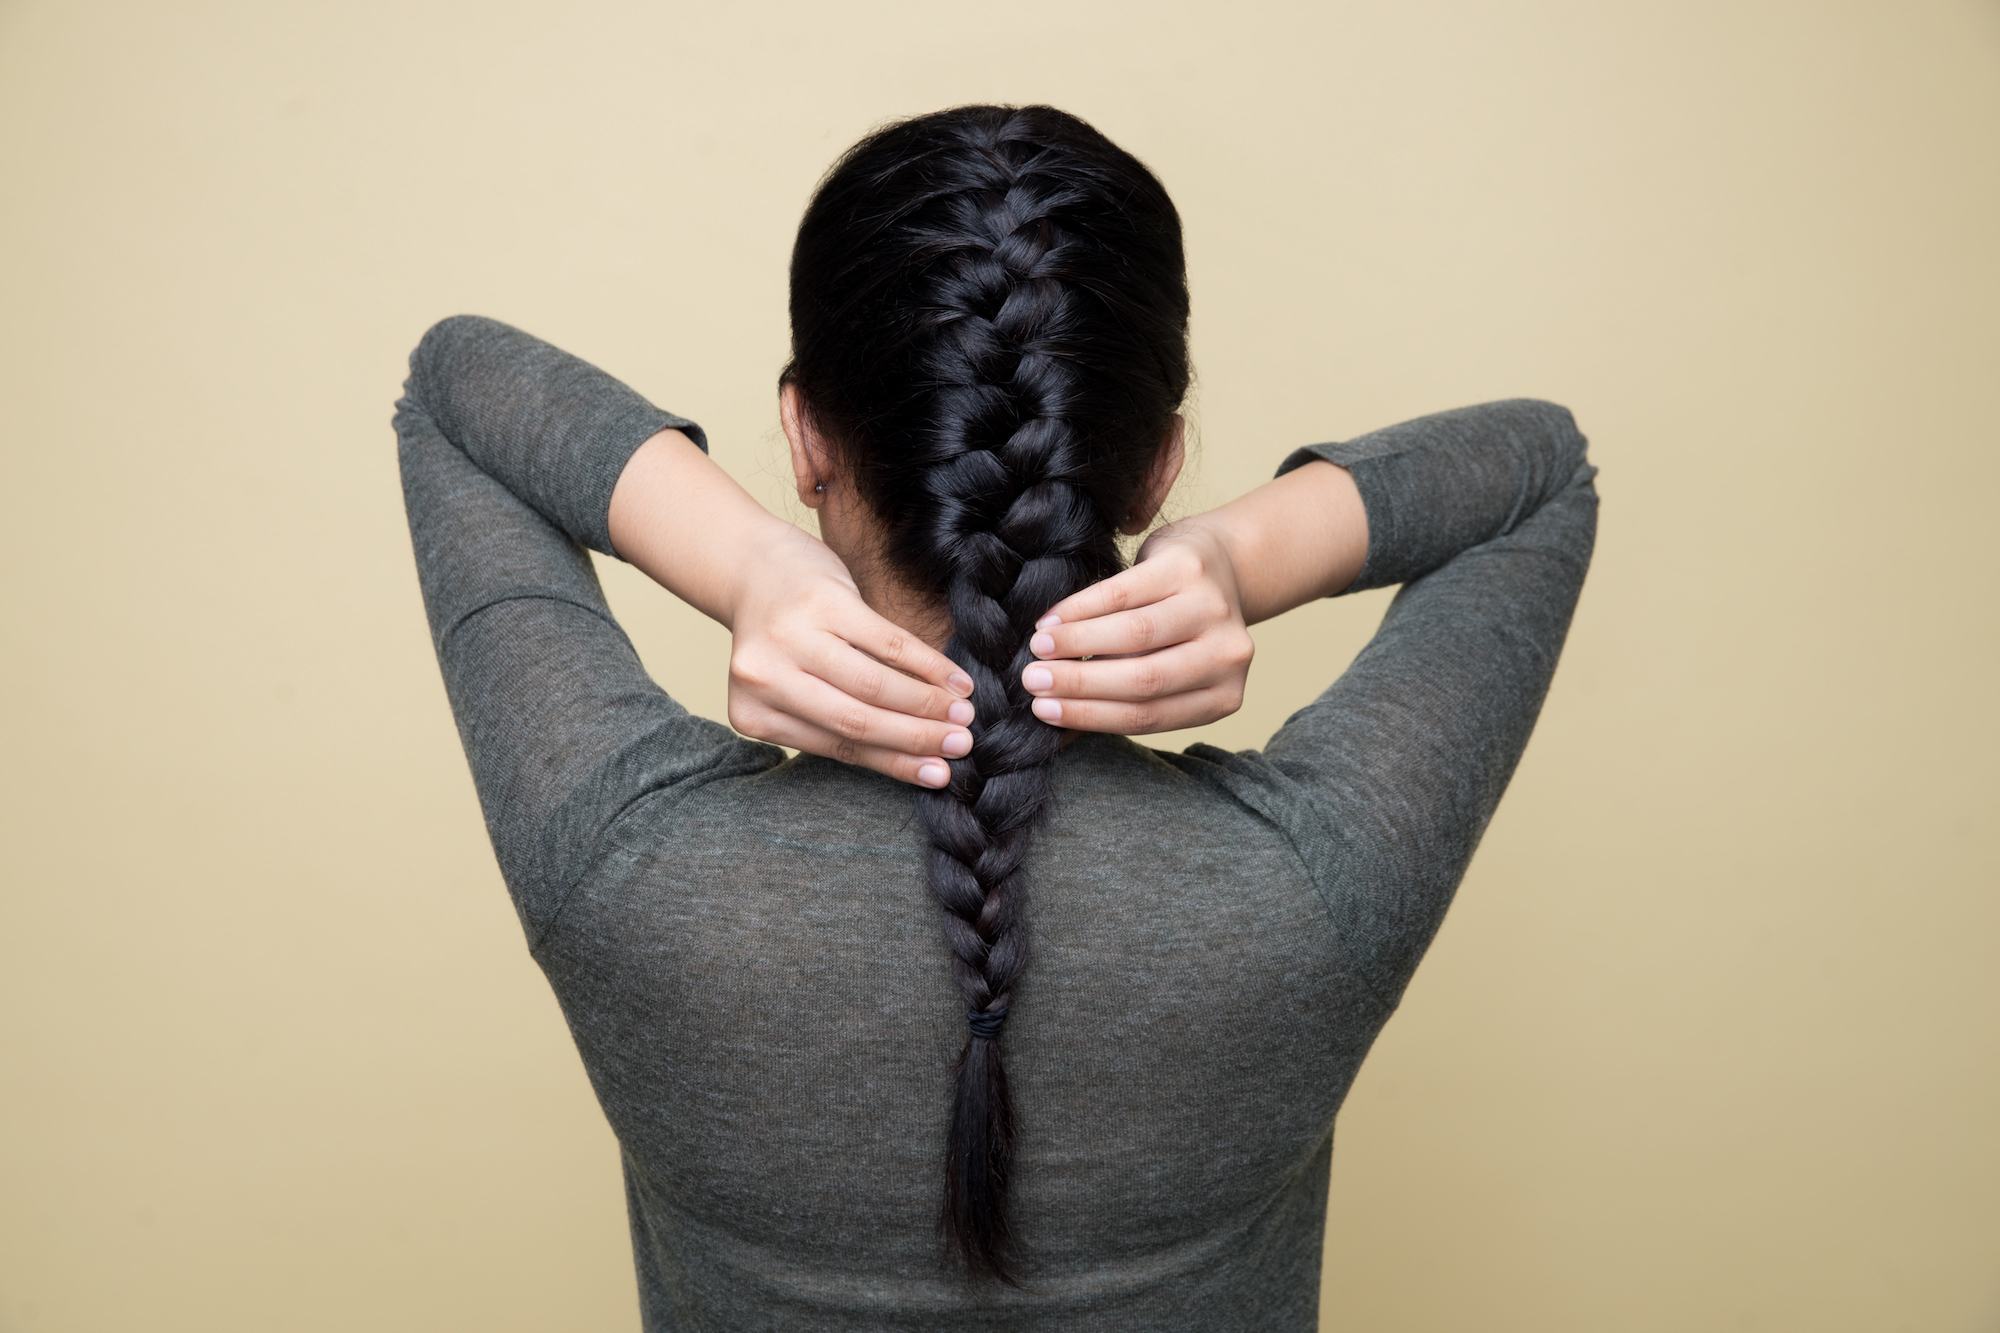 How To Braid Hair: 7 Types You Can Learn At Home - Vermillion All Star Wash